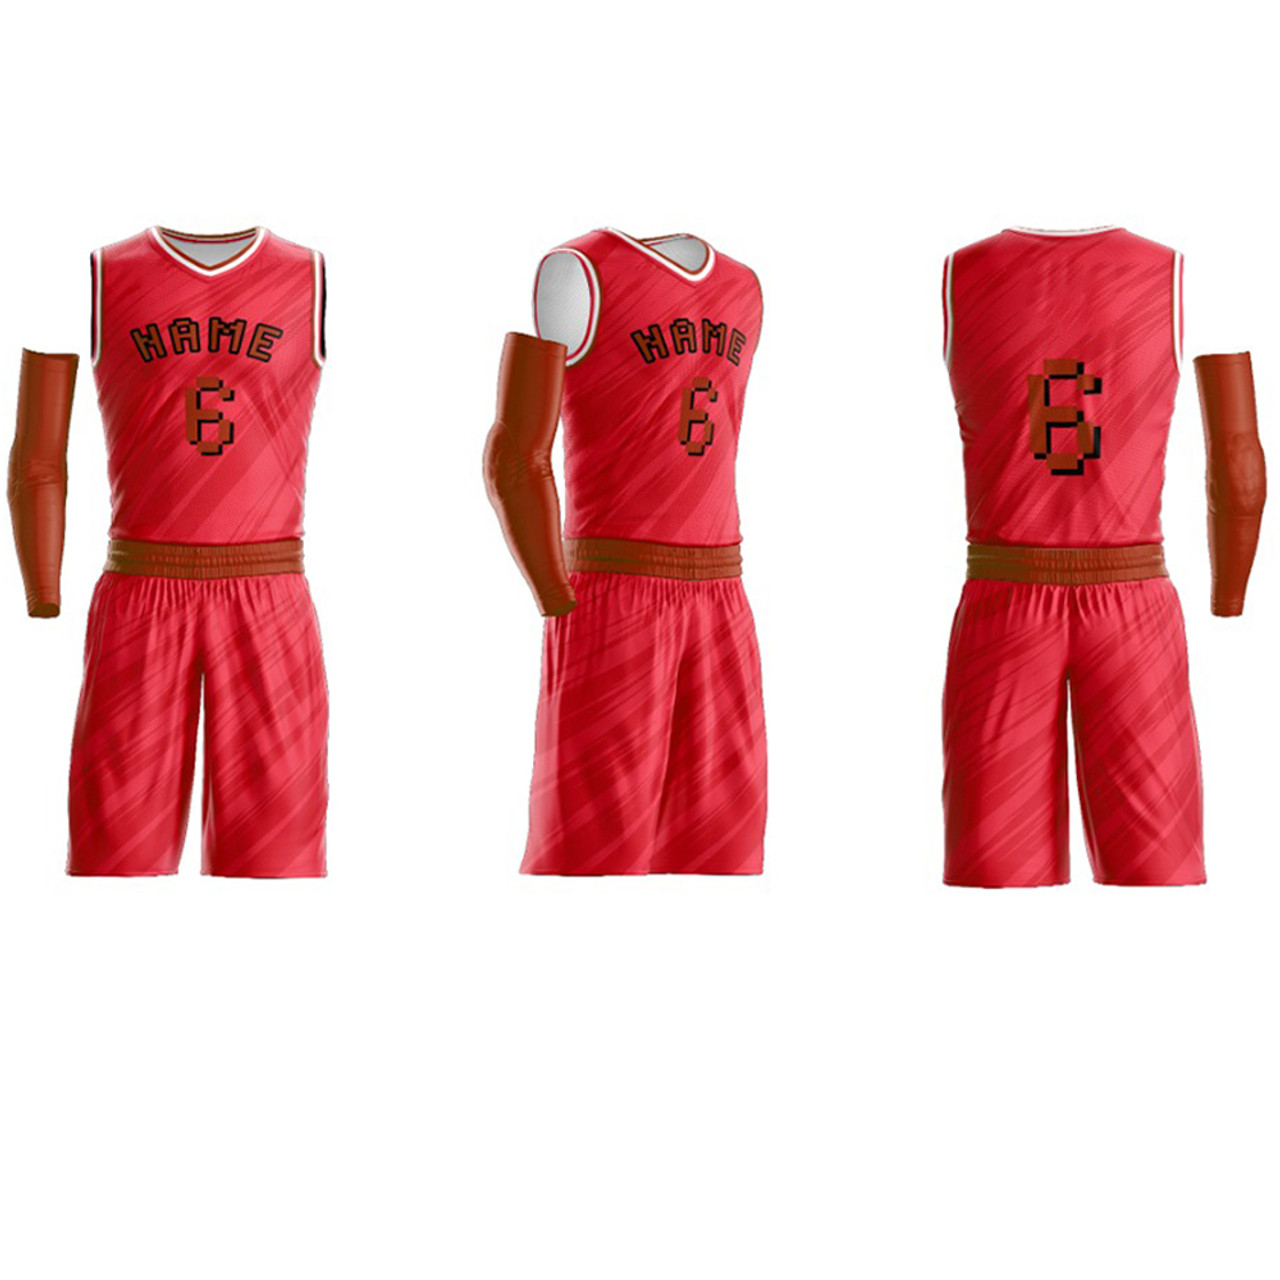 Pin by Prin Prompes on Football shirts  Basketball t shirt designs, Basketball  uniforms design, Best basketball jersey design